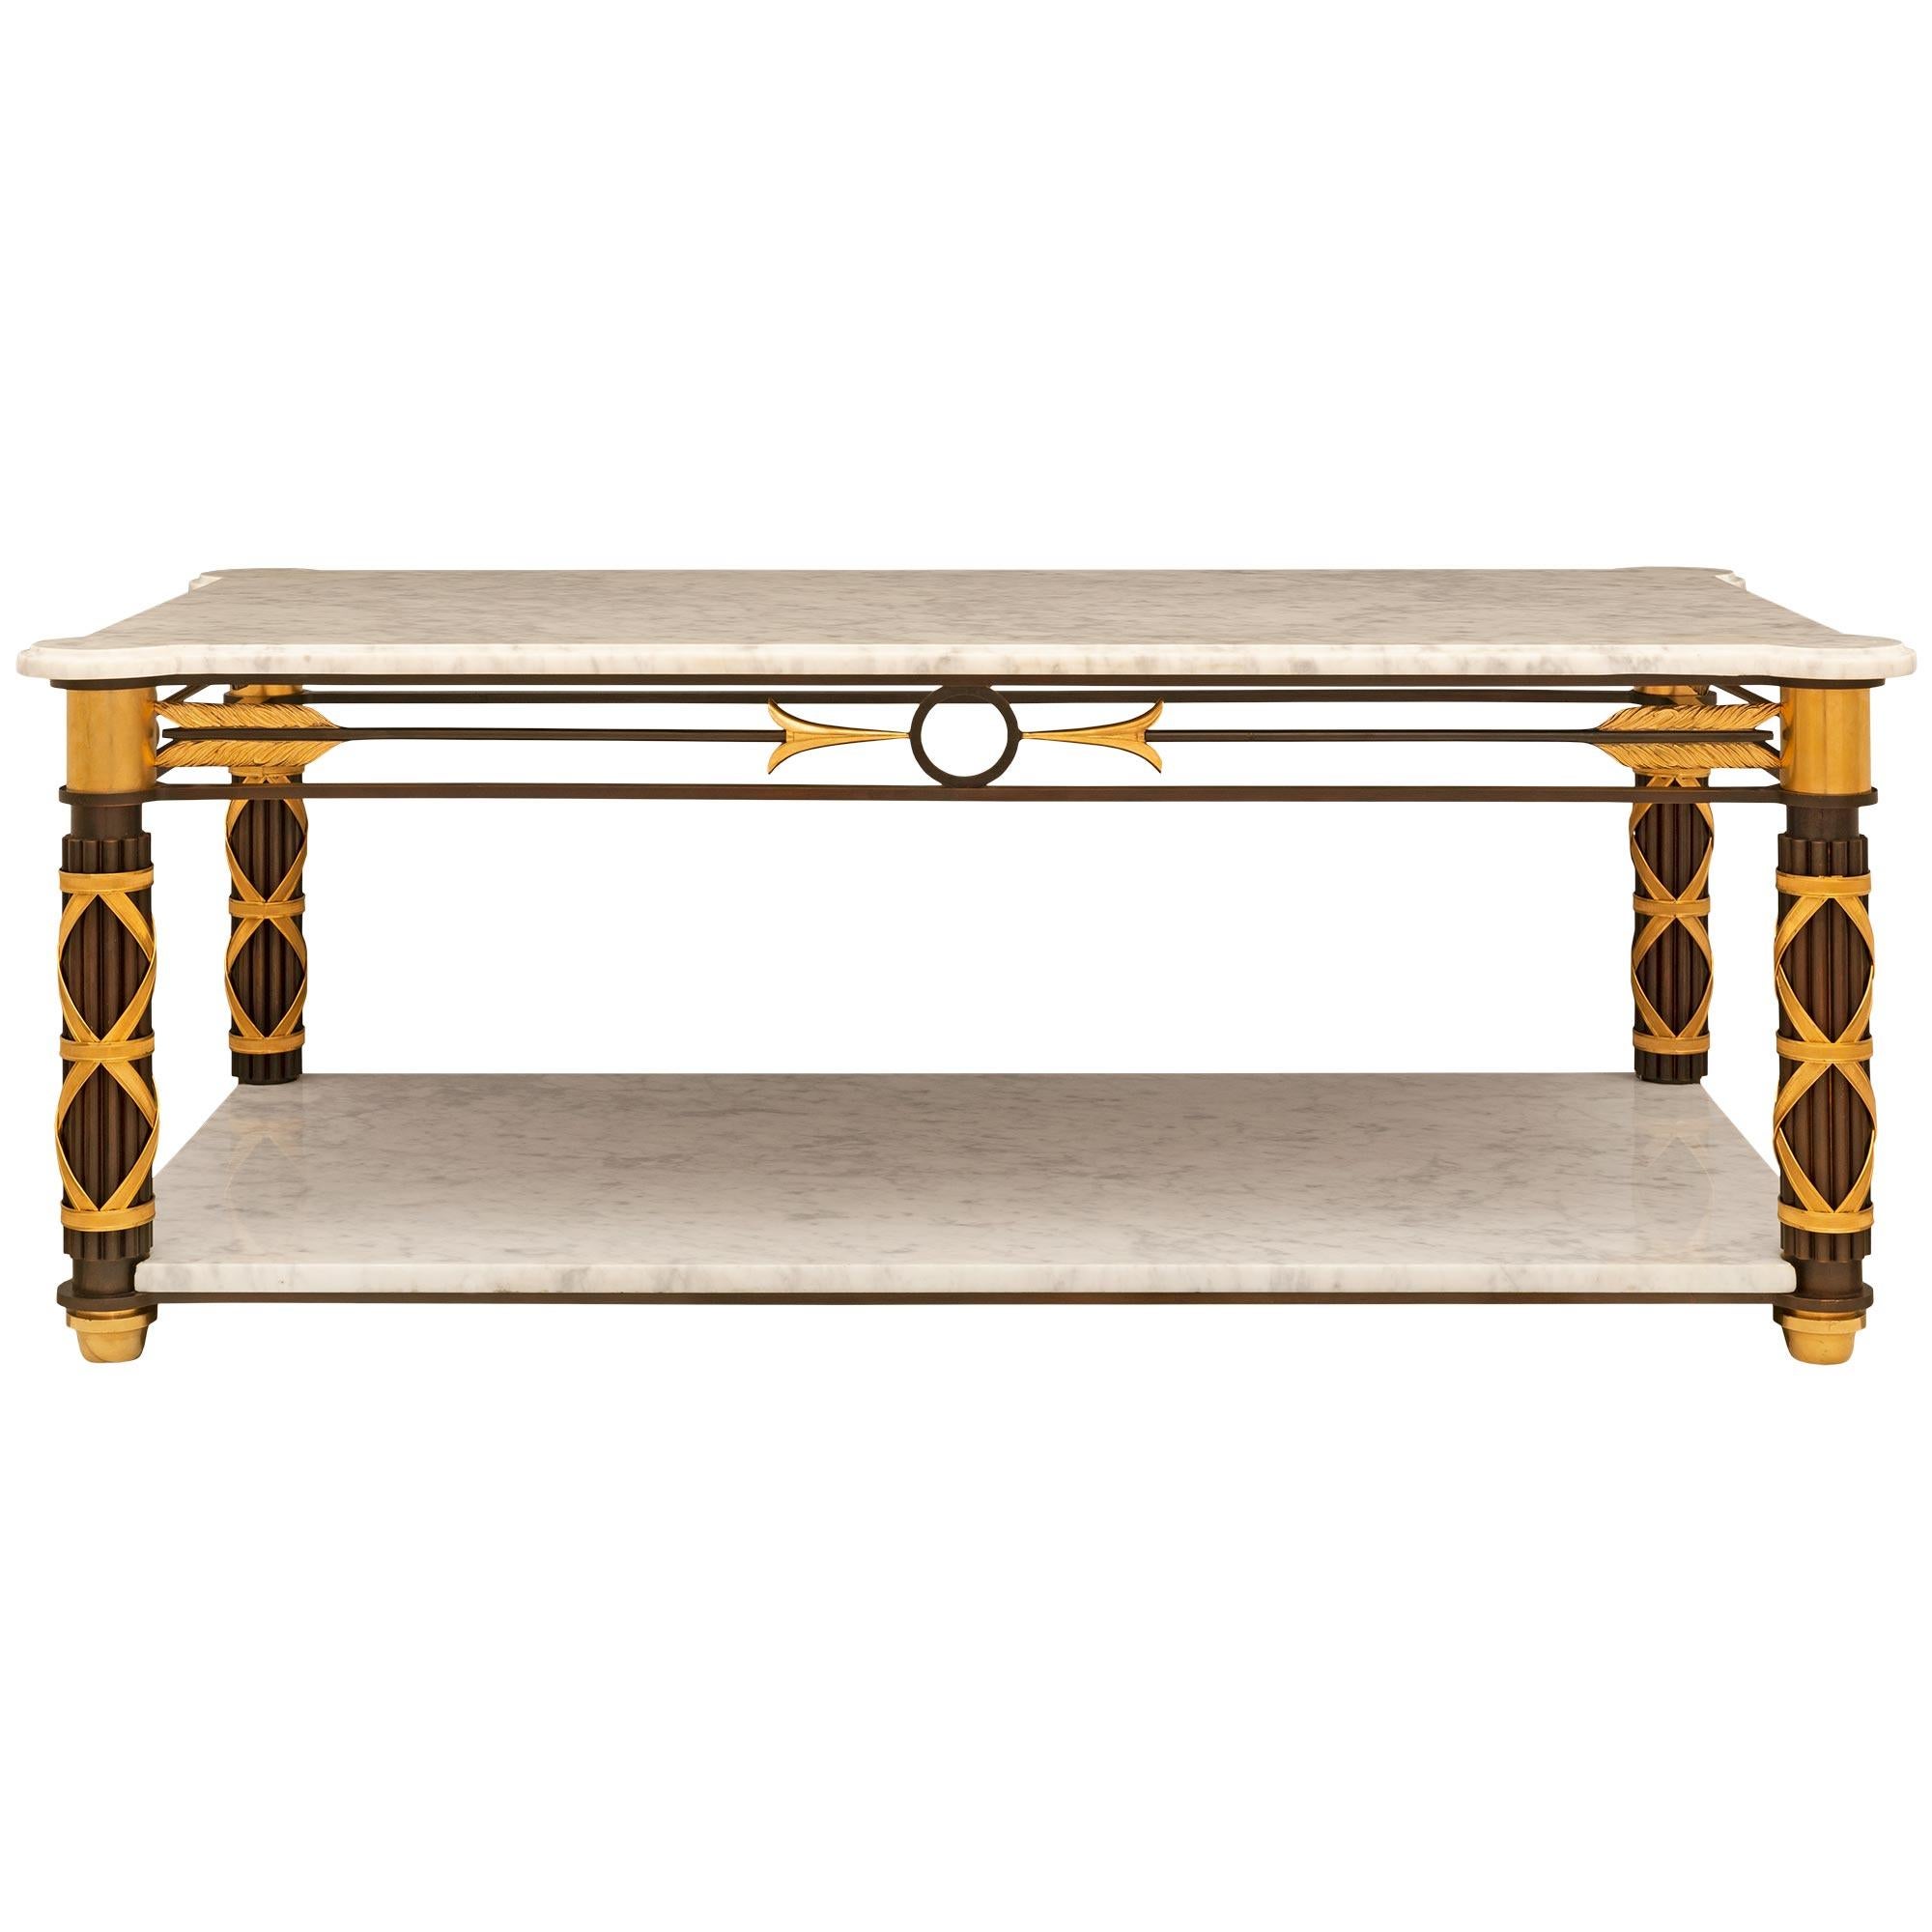 Patinated French 19th Century Neoclassical St. Bronze, Ormolu And Marble Console Table For Sale